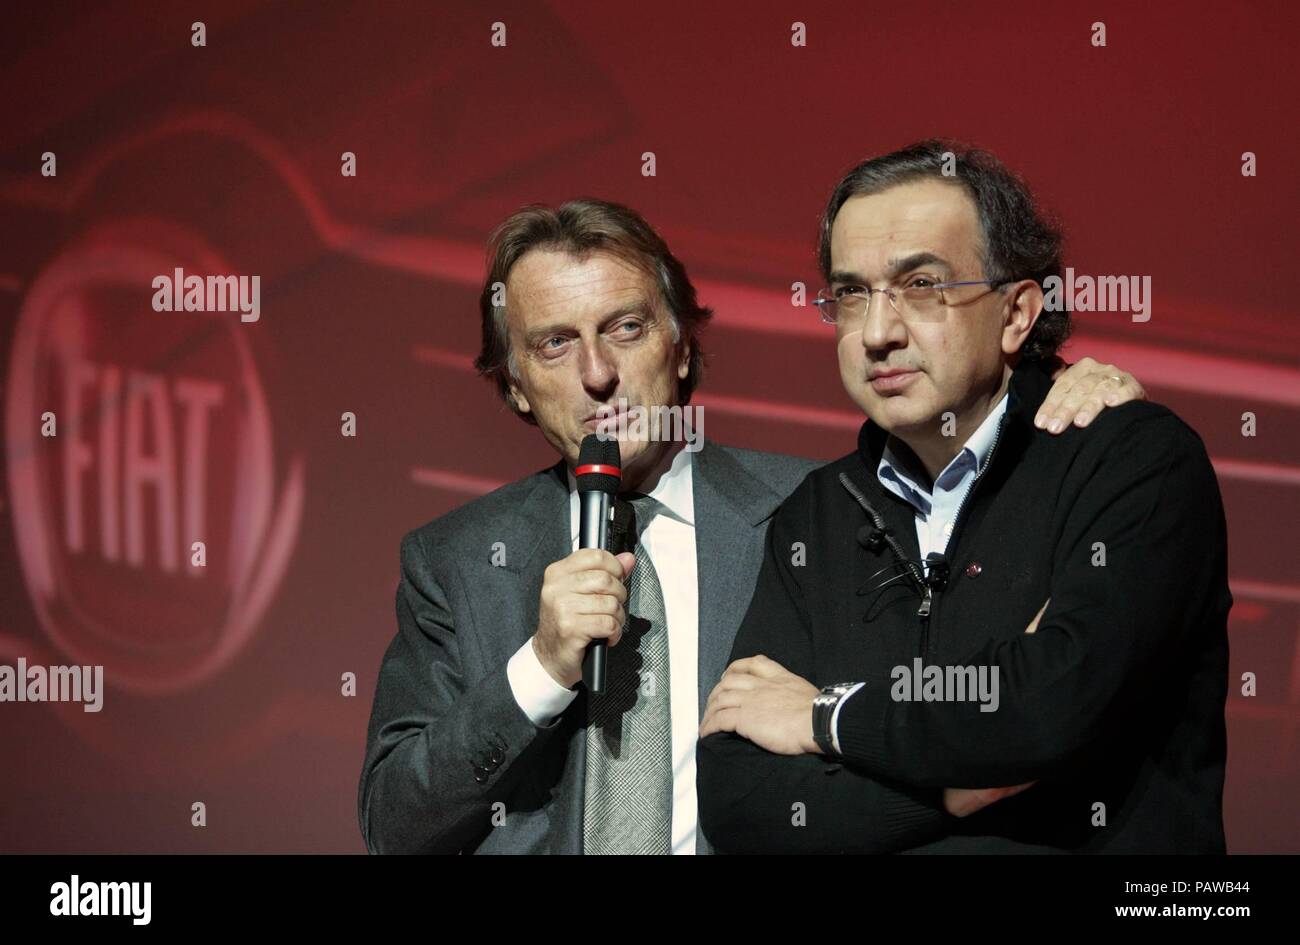 PRESENTATION FIAT BRAVO IN THE PHOTO SERGIO MARCHIONNE CHIEF EXECUTIVE OFFICER FIAT AND LUCA DI MONTEZEMOLO PRESIDENT FIAT (Mario Maci, ROME - 2007-01-31) ps the photo can be used respecting the context in which it was taken, and without the defamatory intent of the decorum of the people represented (Mario Maci, Foto Repertorio - 2018-07-25) ps the photo can be used respecting the context in which it was taken, and without the defamatory intent of the decoration of the people represented Stock Photo